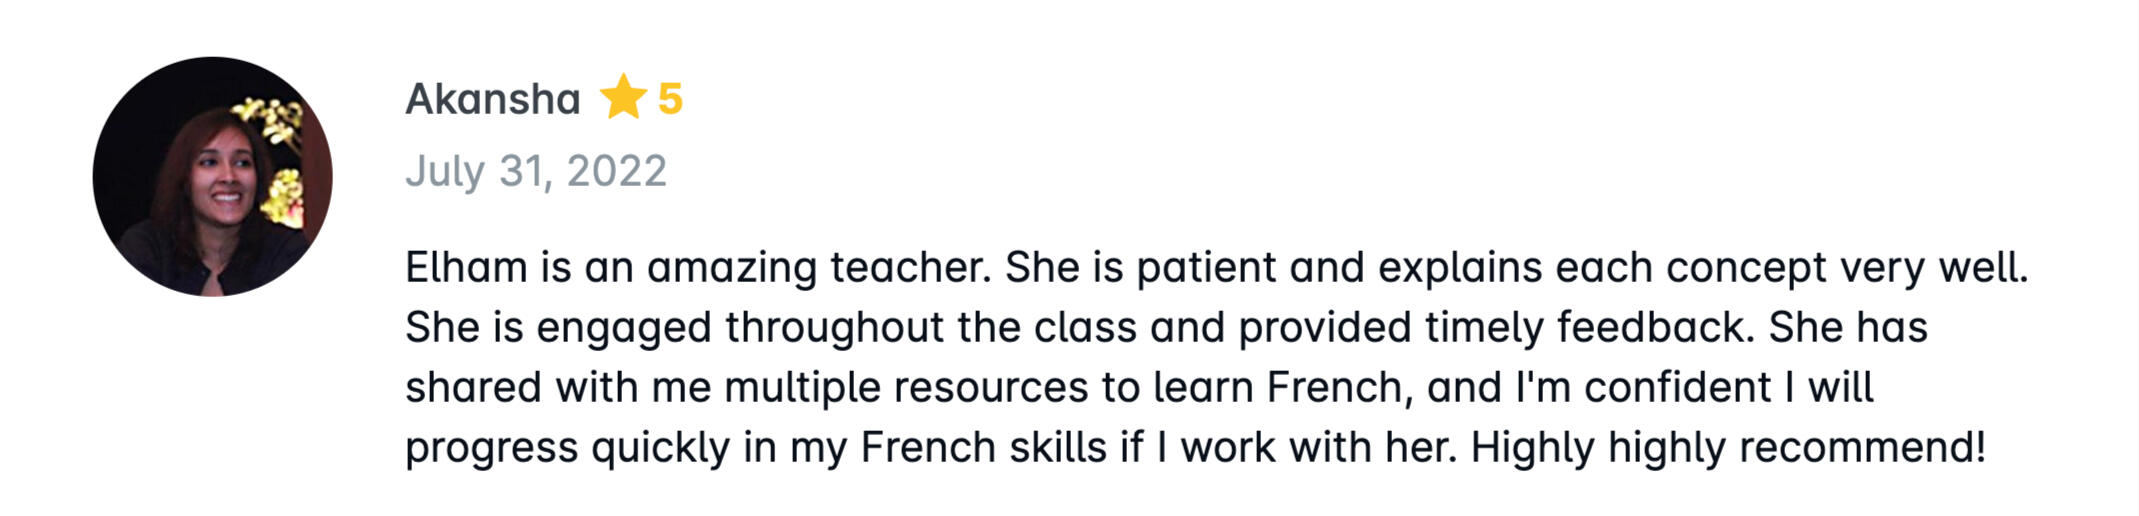 Elham is an amazing teacher. She is patient and explains each concept very well. She is engaged throughout the class and provided timely feedback. She has shared with me multiple resources to learn French, and I'm confident I will progress quickly in my Fr